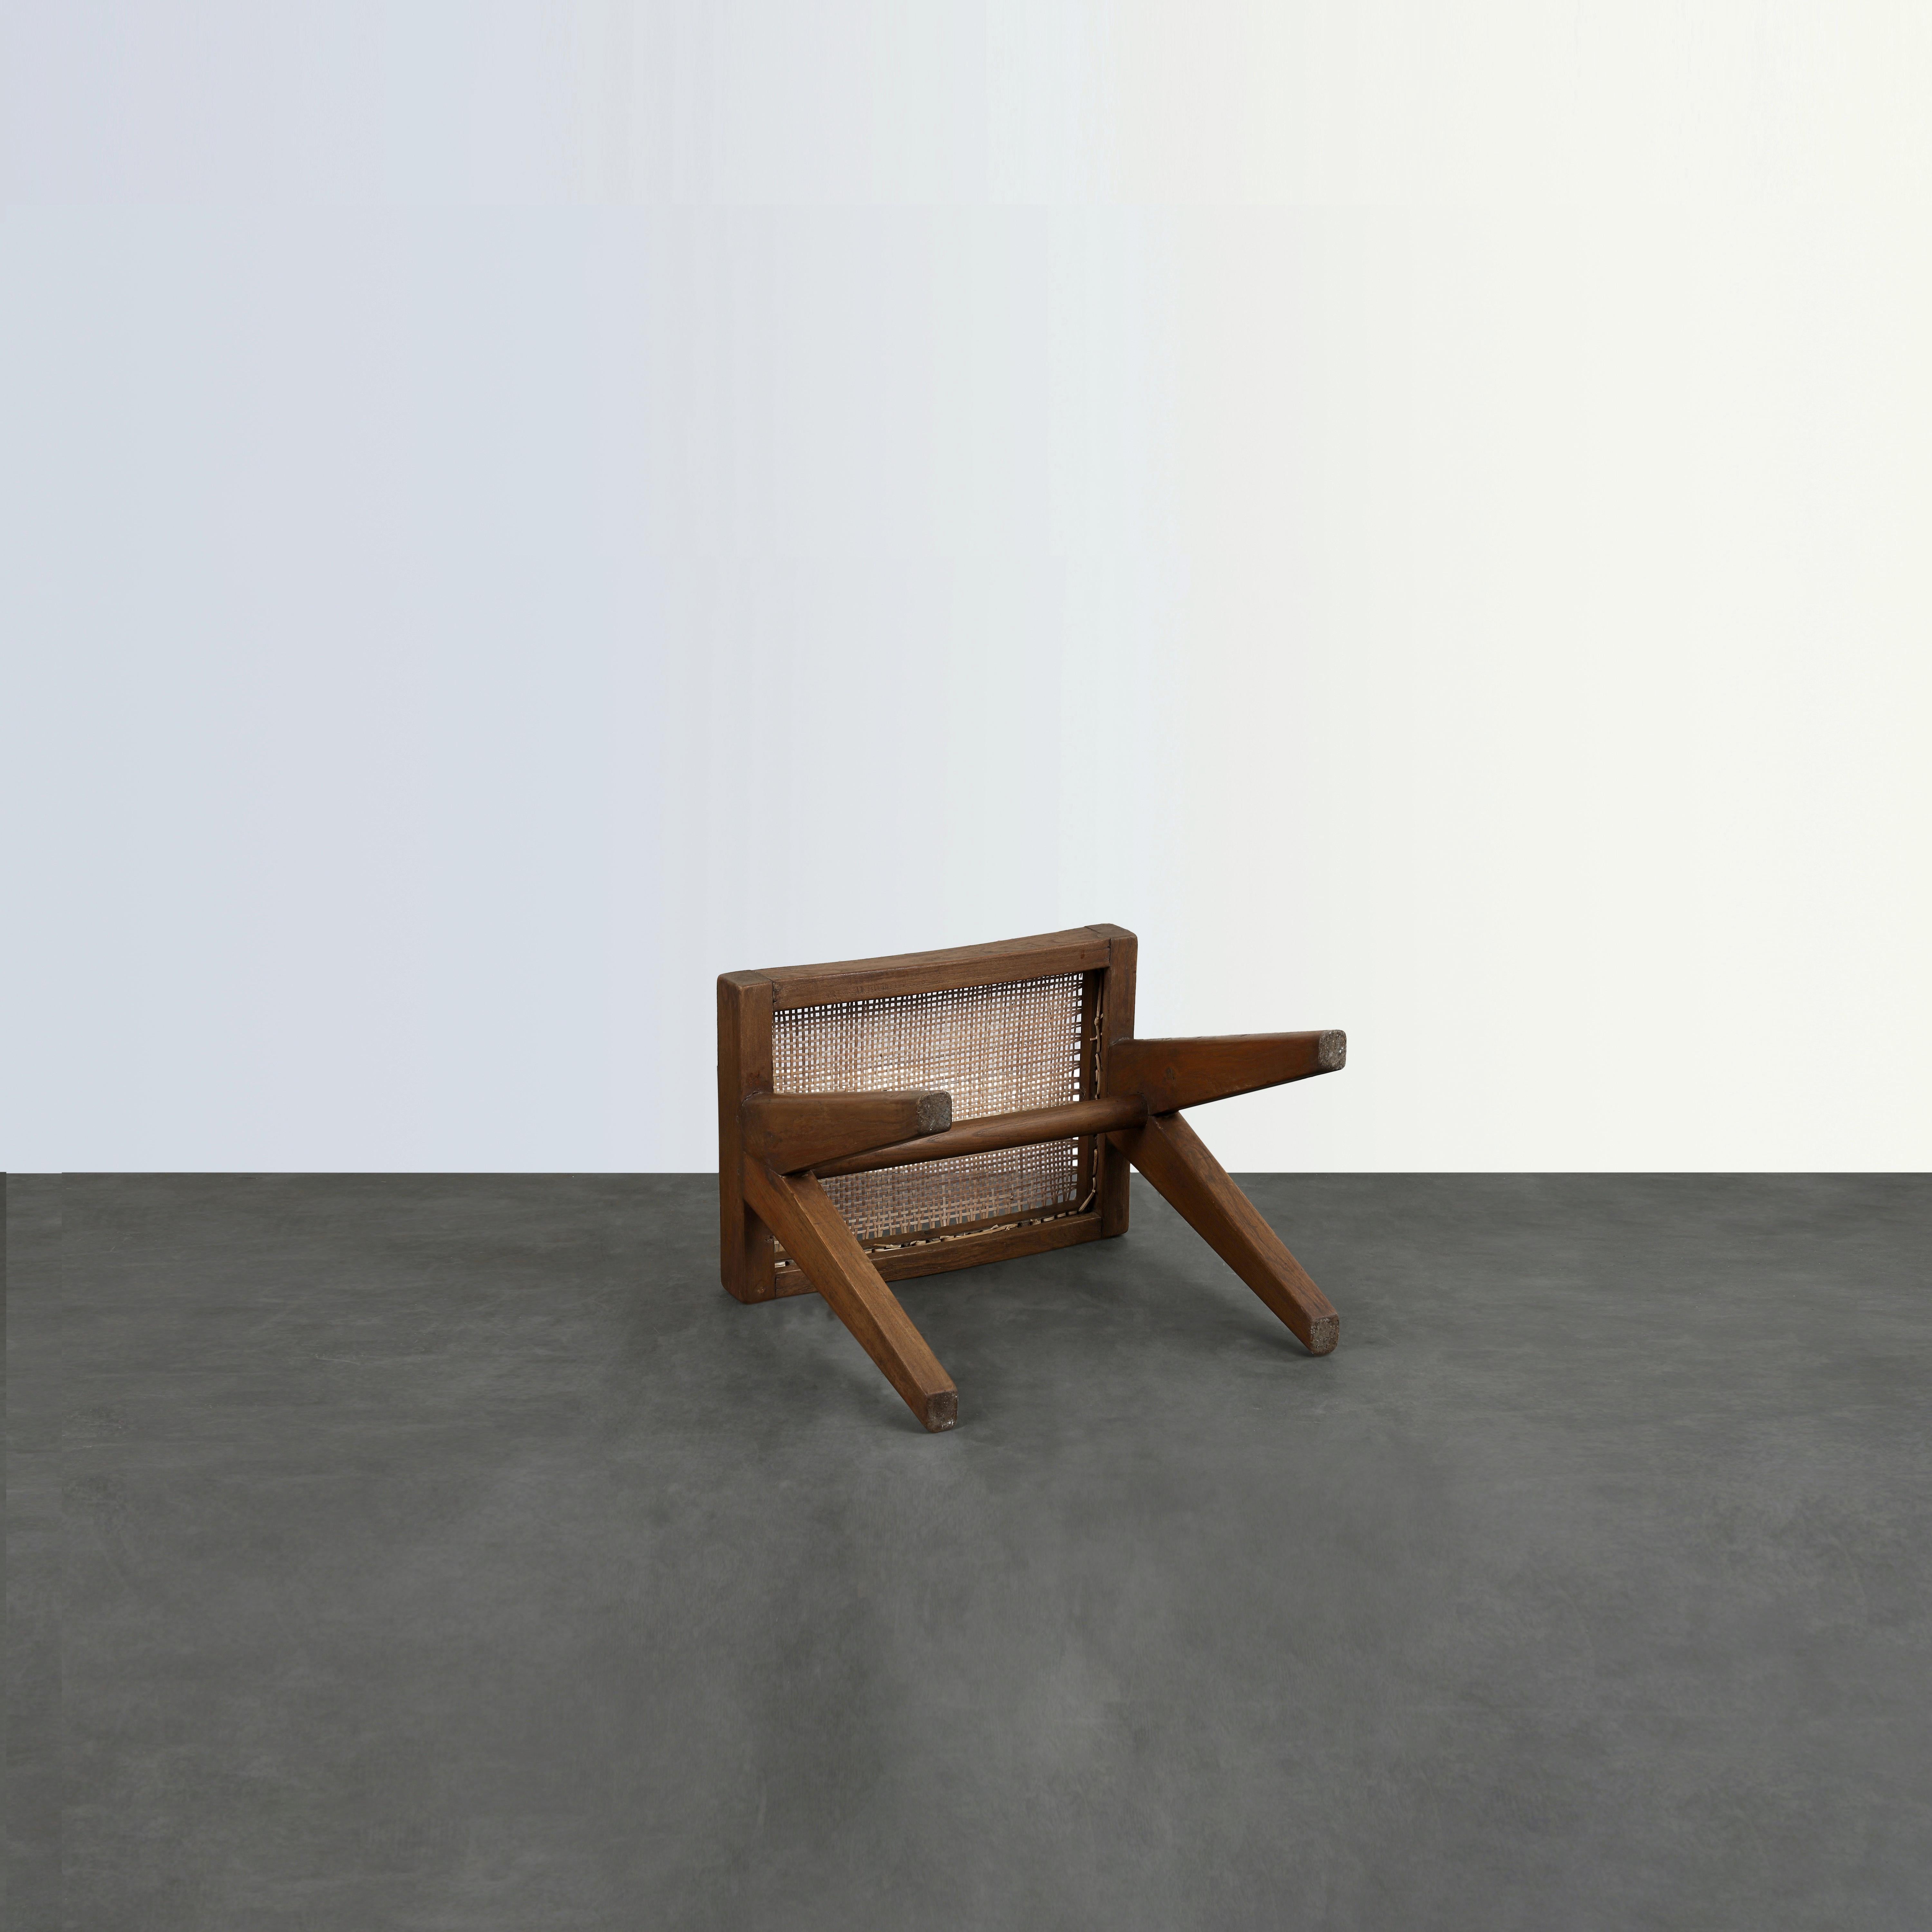 Pierre Jeanneret A-Legs Cane Stool Authentic Mid-Century Modern PJ-SI-34-A In Good Condition For Sale In Zürich, CH